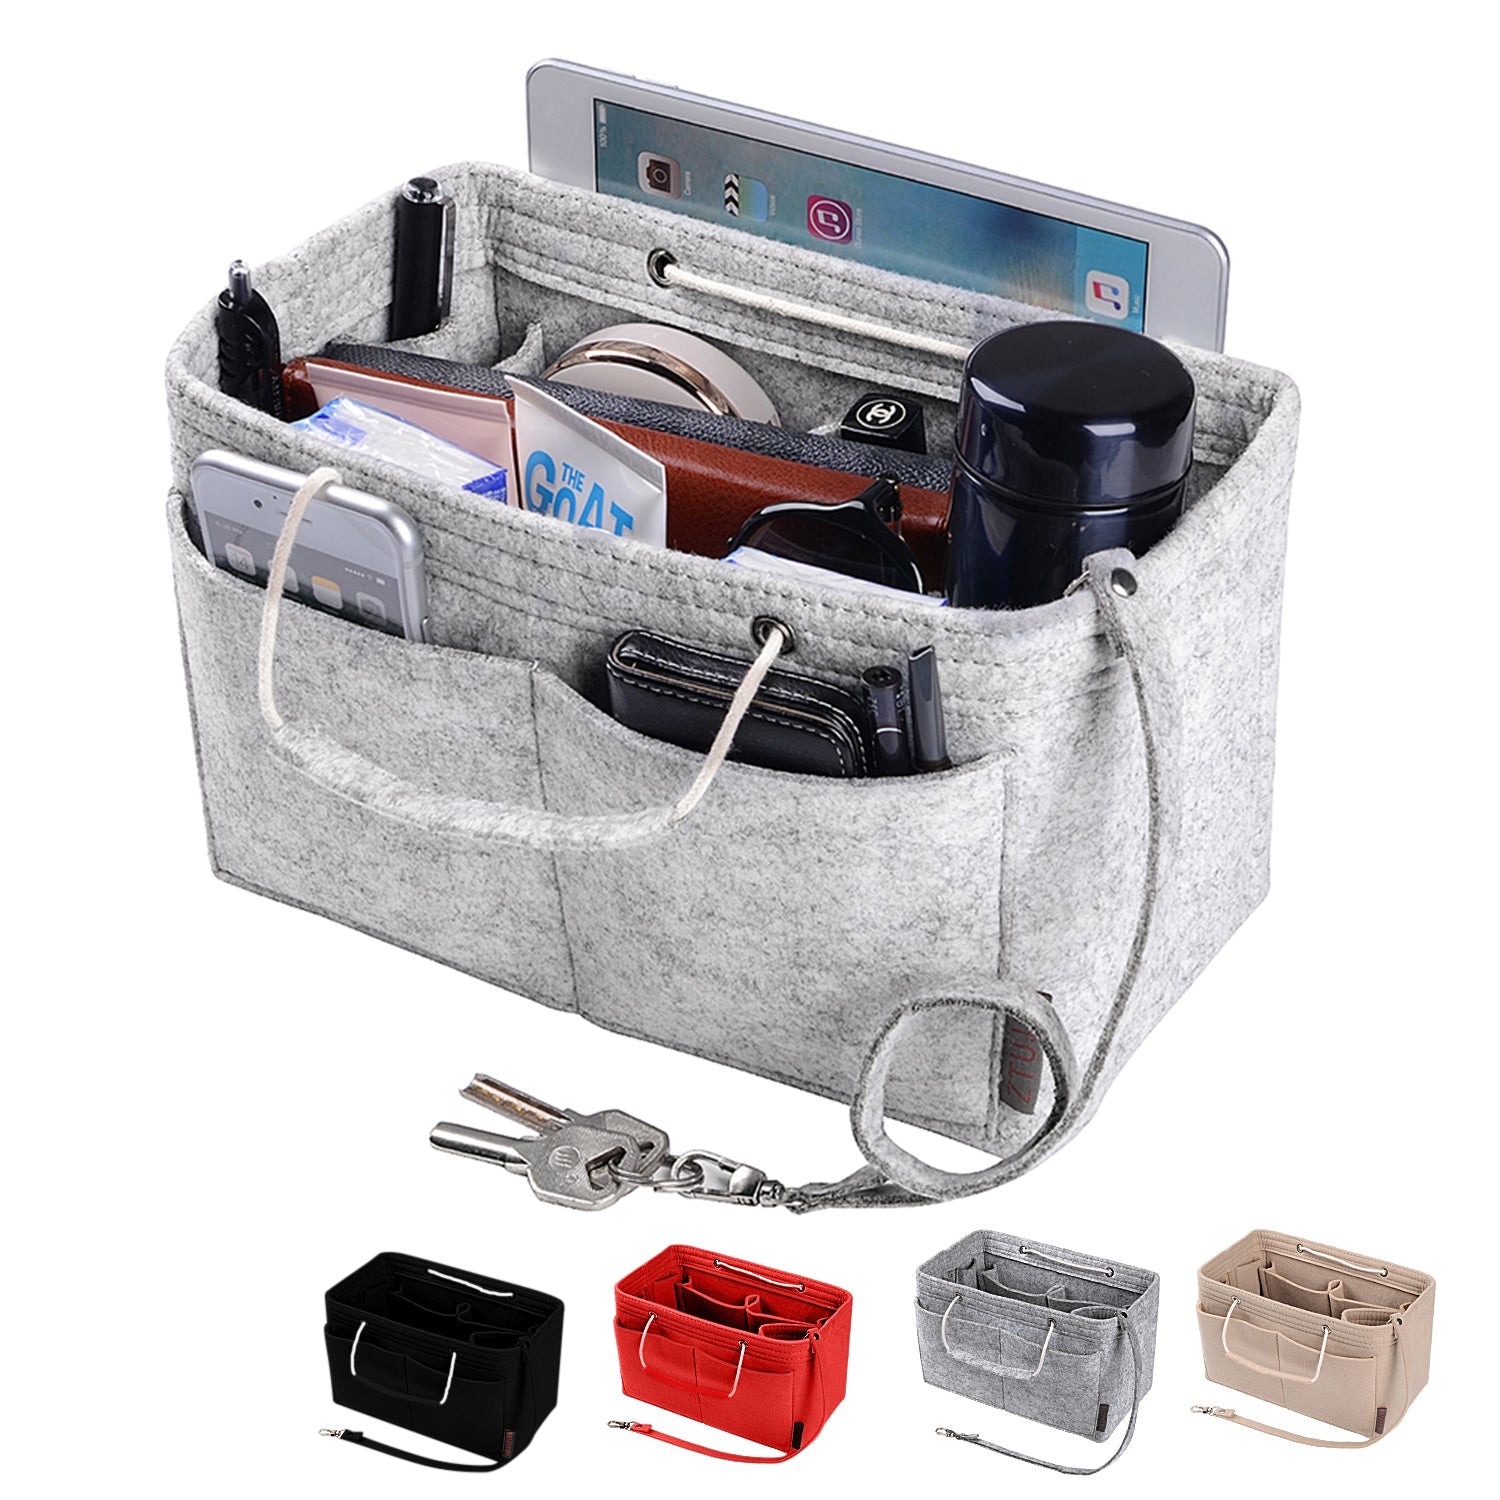 Felt Purse Organizer with Dual Handles and Multiple Pockets for Speedy, Neverfull, and More